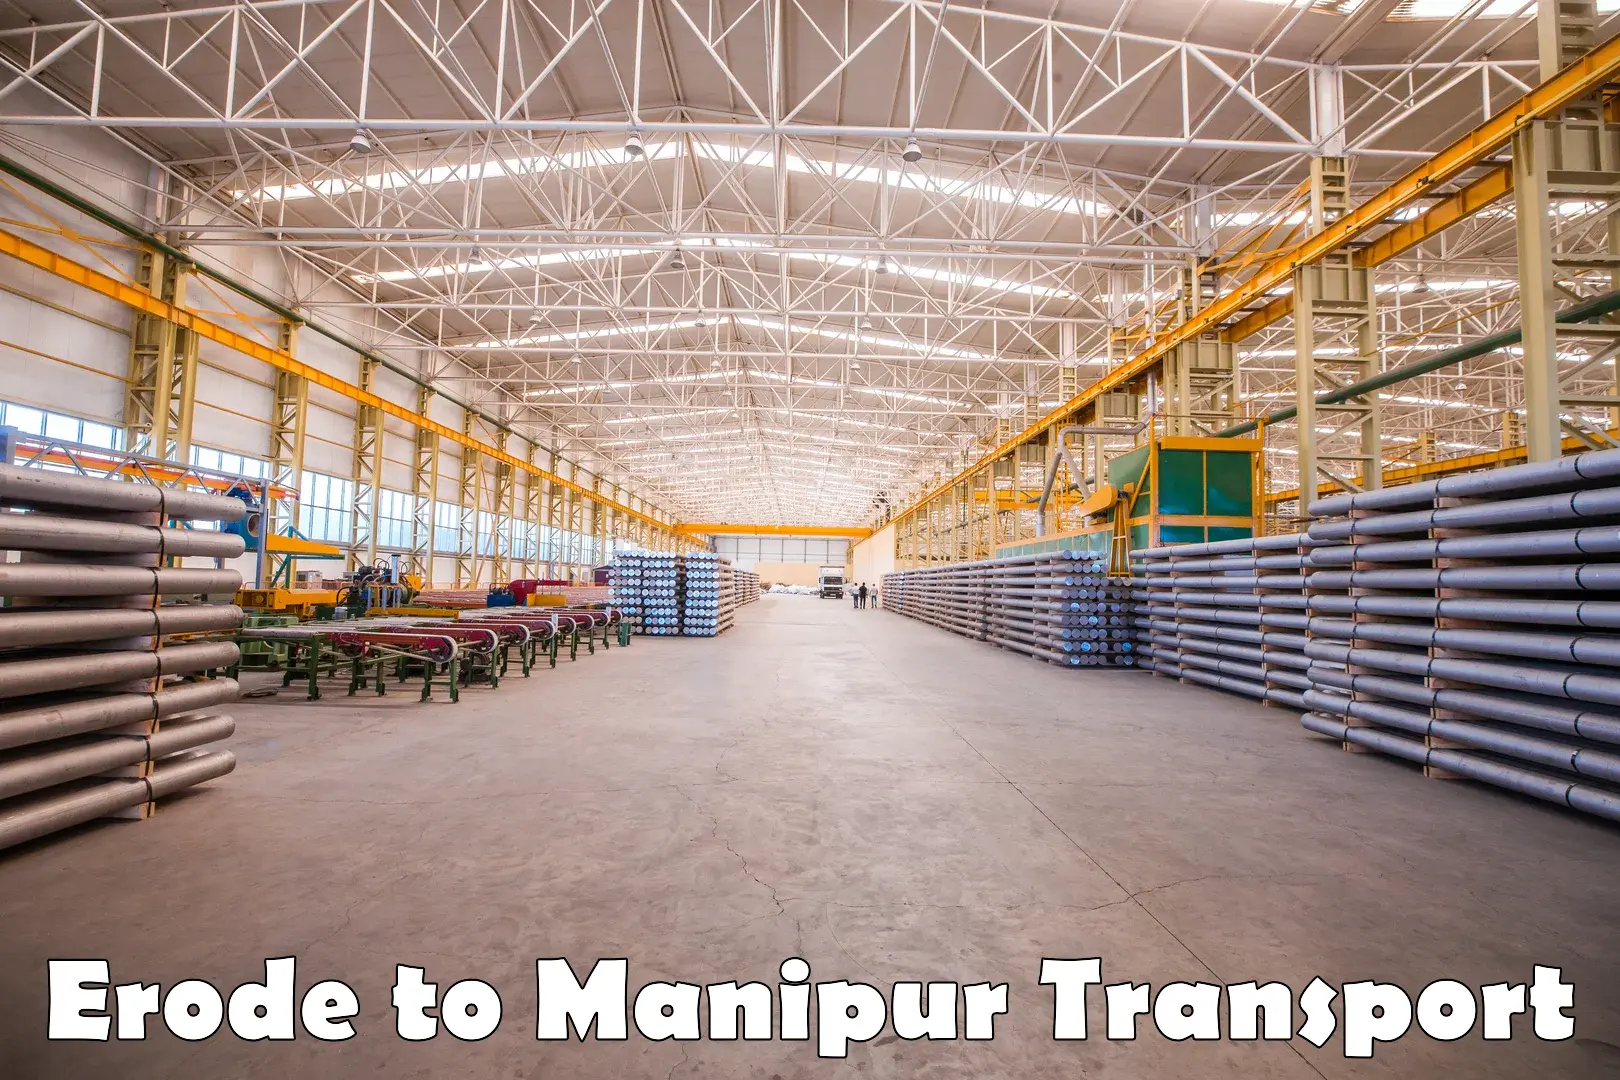 Nearby transport service Erode to Manipur